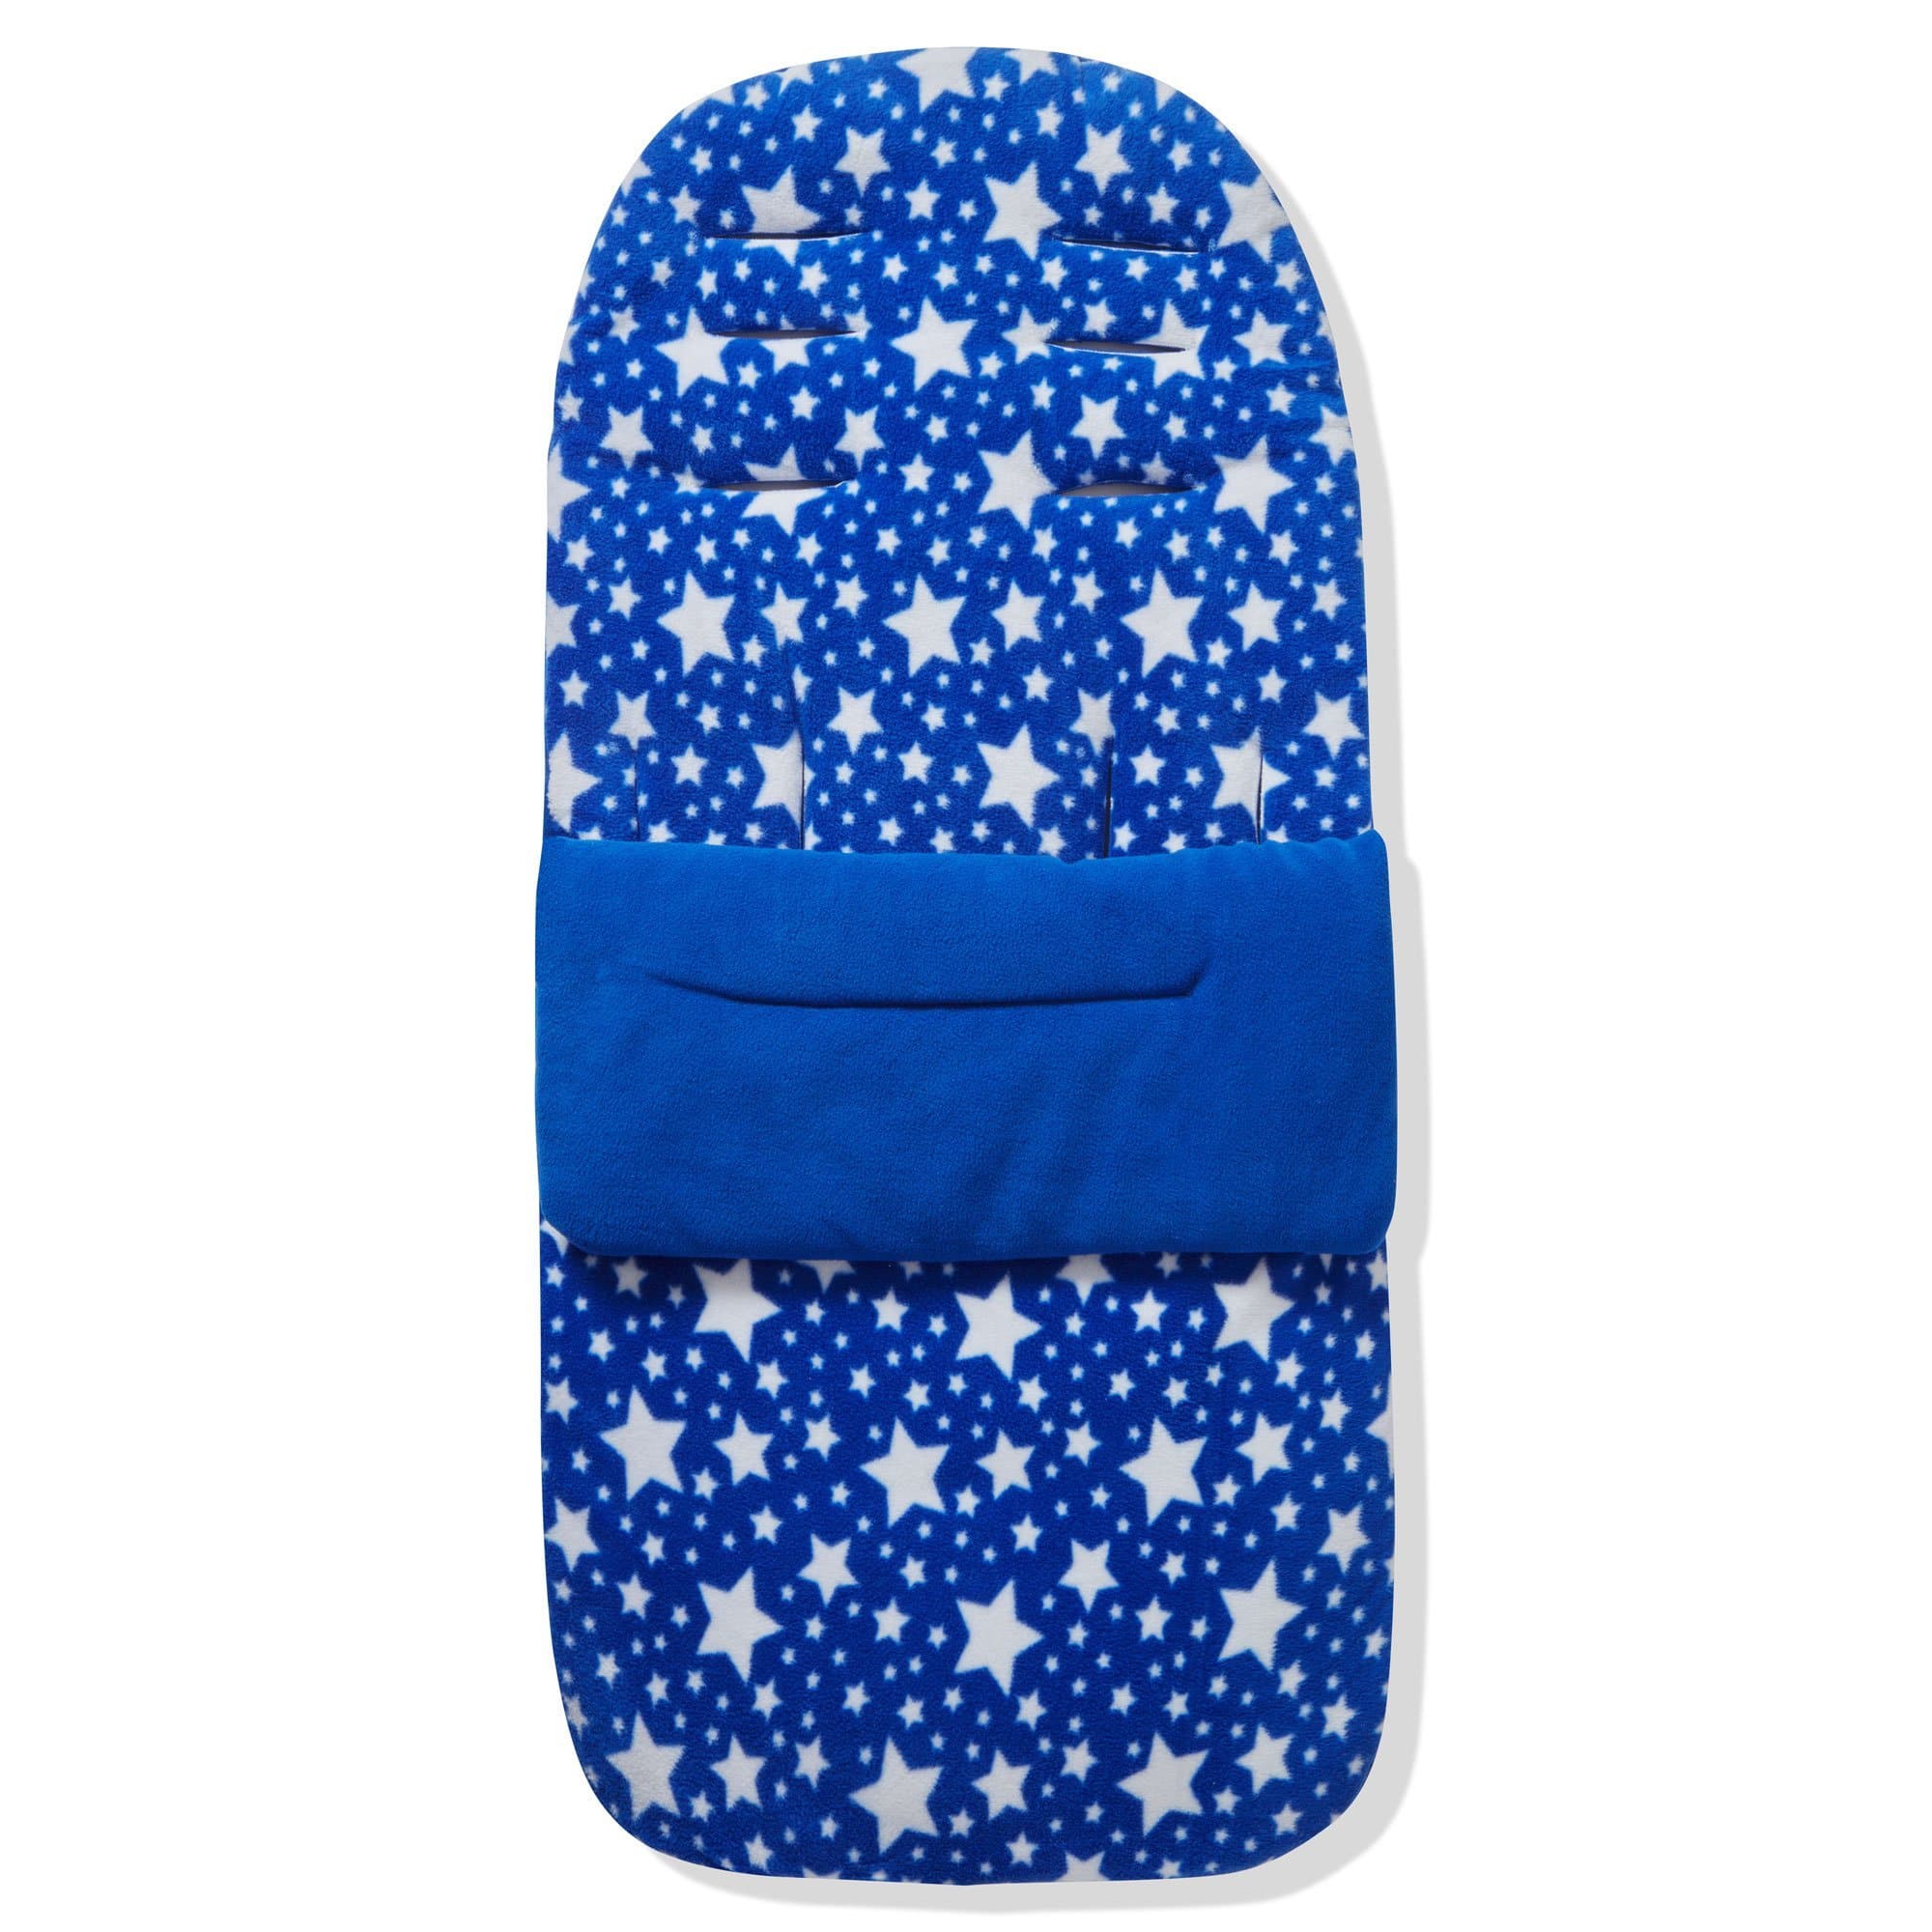 Fleece Footmuff / Cosy Toes Compatible with Maclaren - Blue Star / Fits All Models | For Your Little One